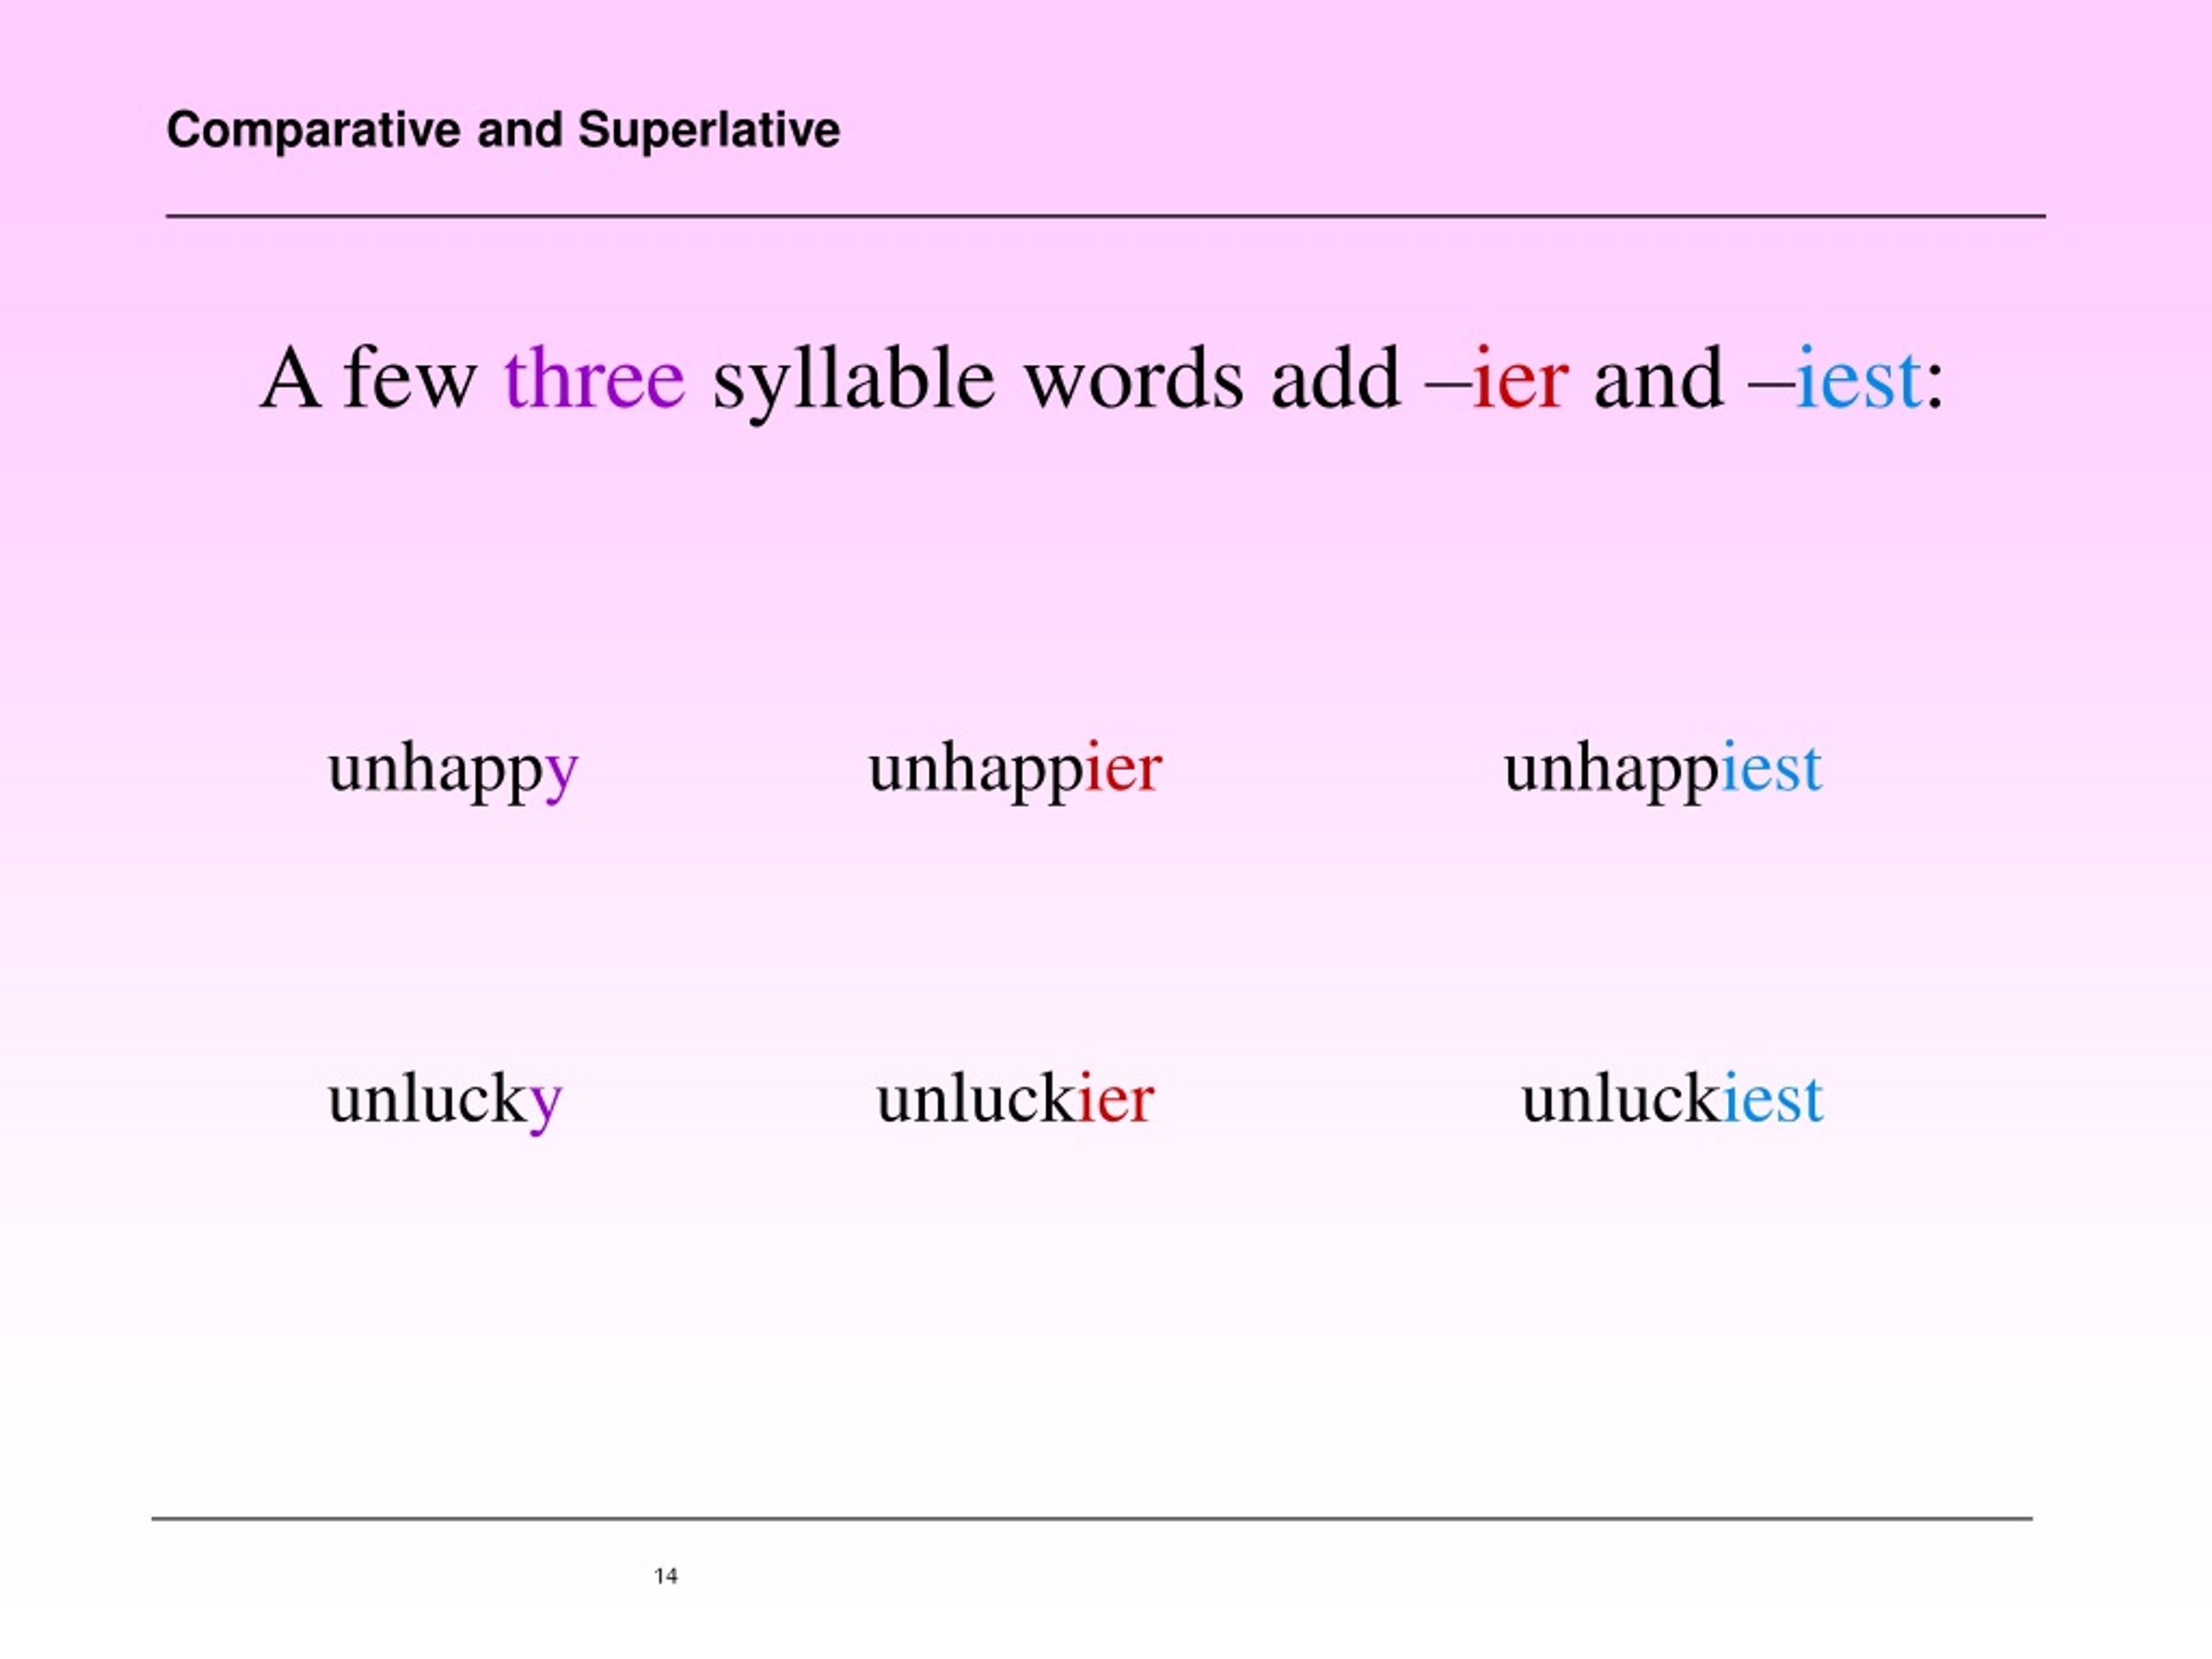 New comparative and superlative. Comparatives and Superlatives. Предложения Comparative and Superlative. Few Comparative and Superlative. Comparative and Superlatives упражнения 3 syllables.